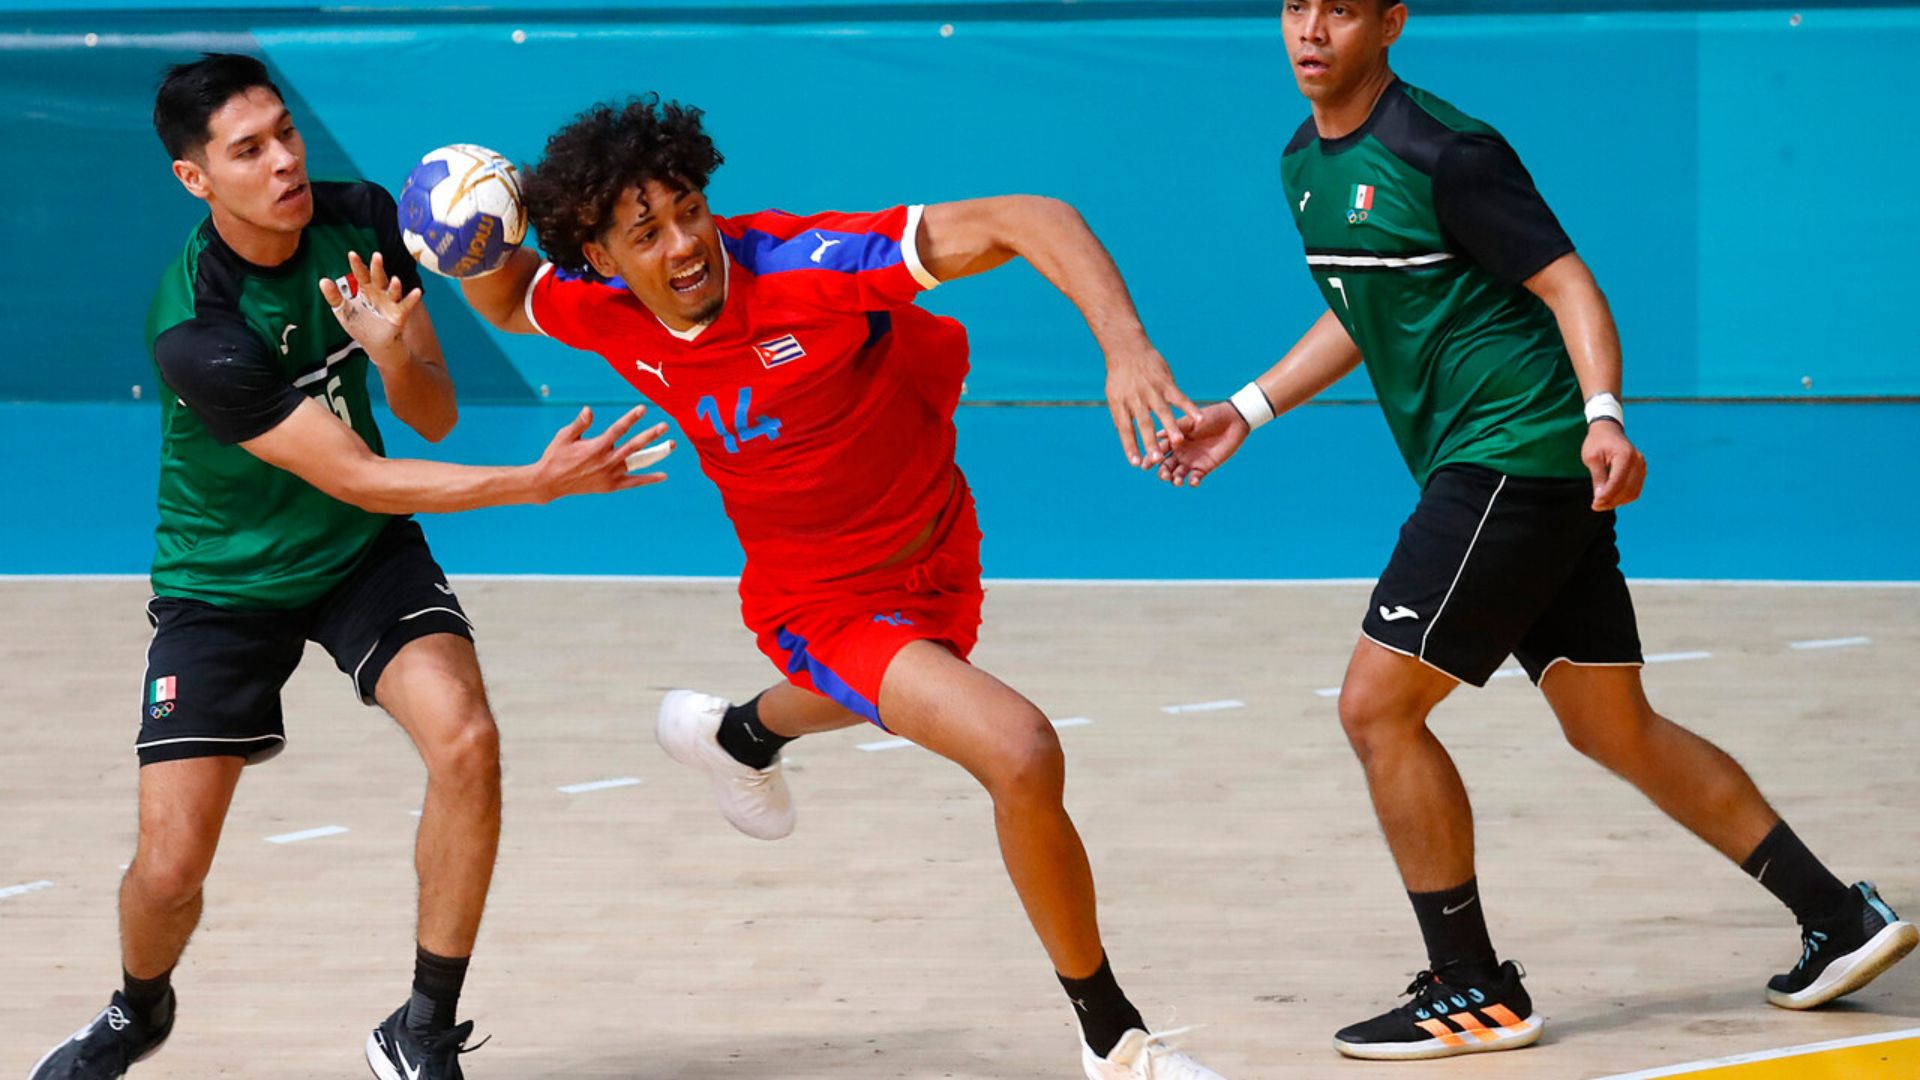 Cuba Secures Narrow Victory in Handball and Aims for Fifth Place Against Uruguay